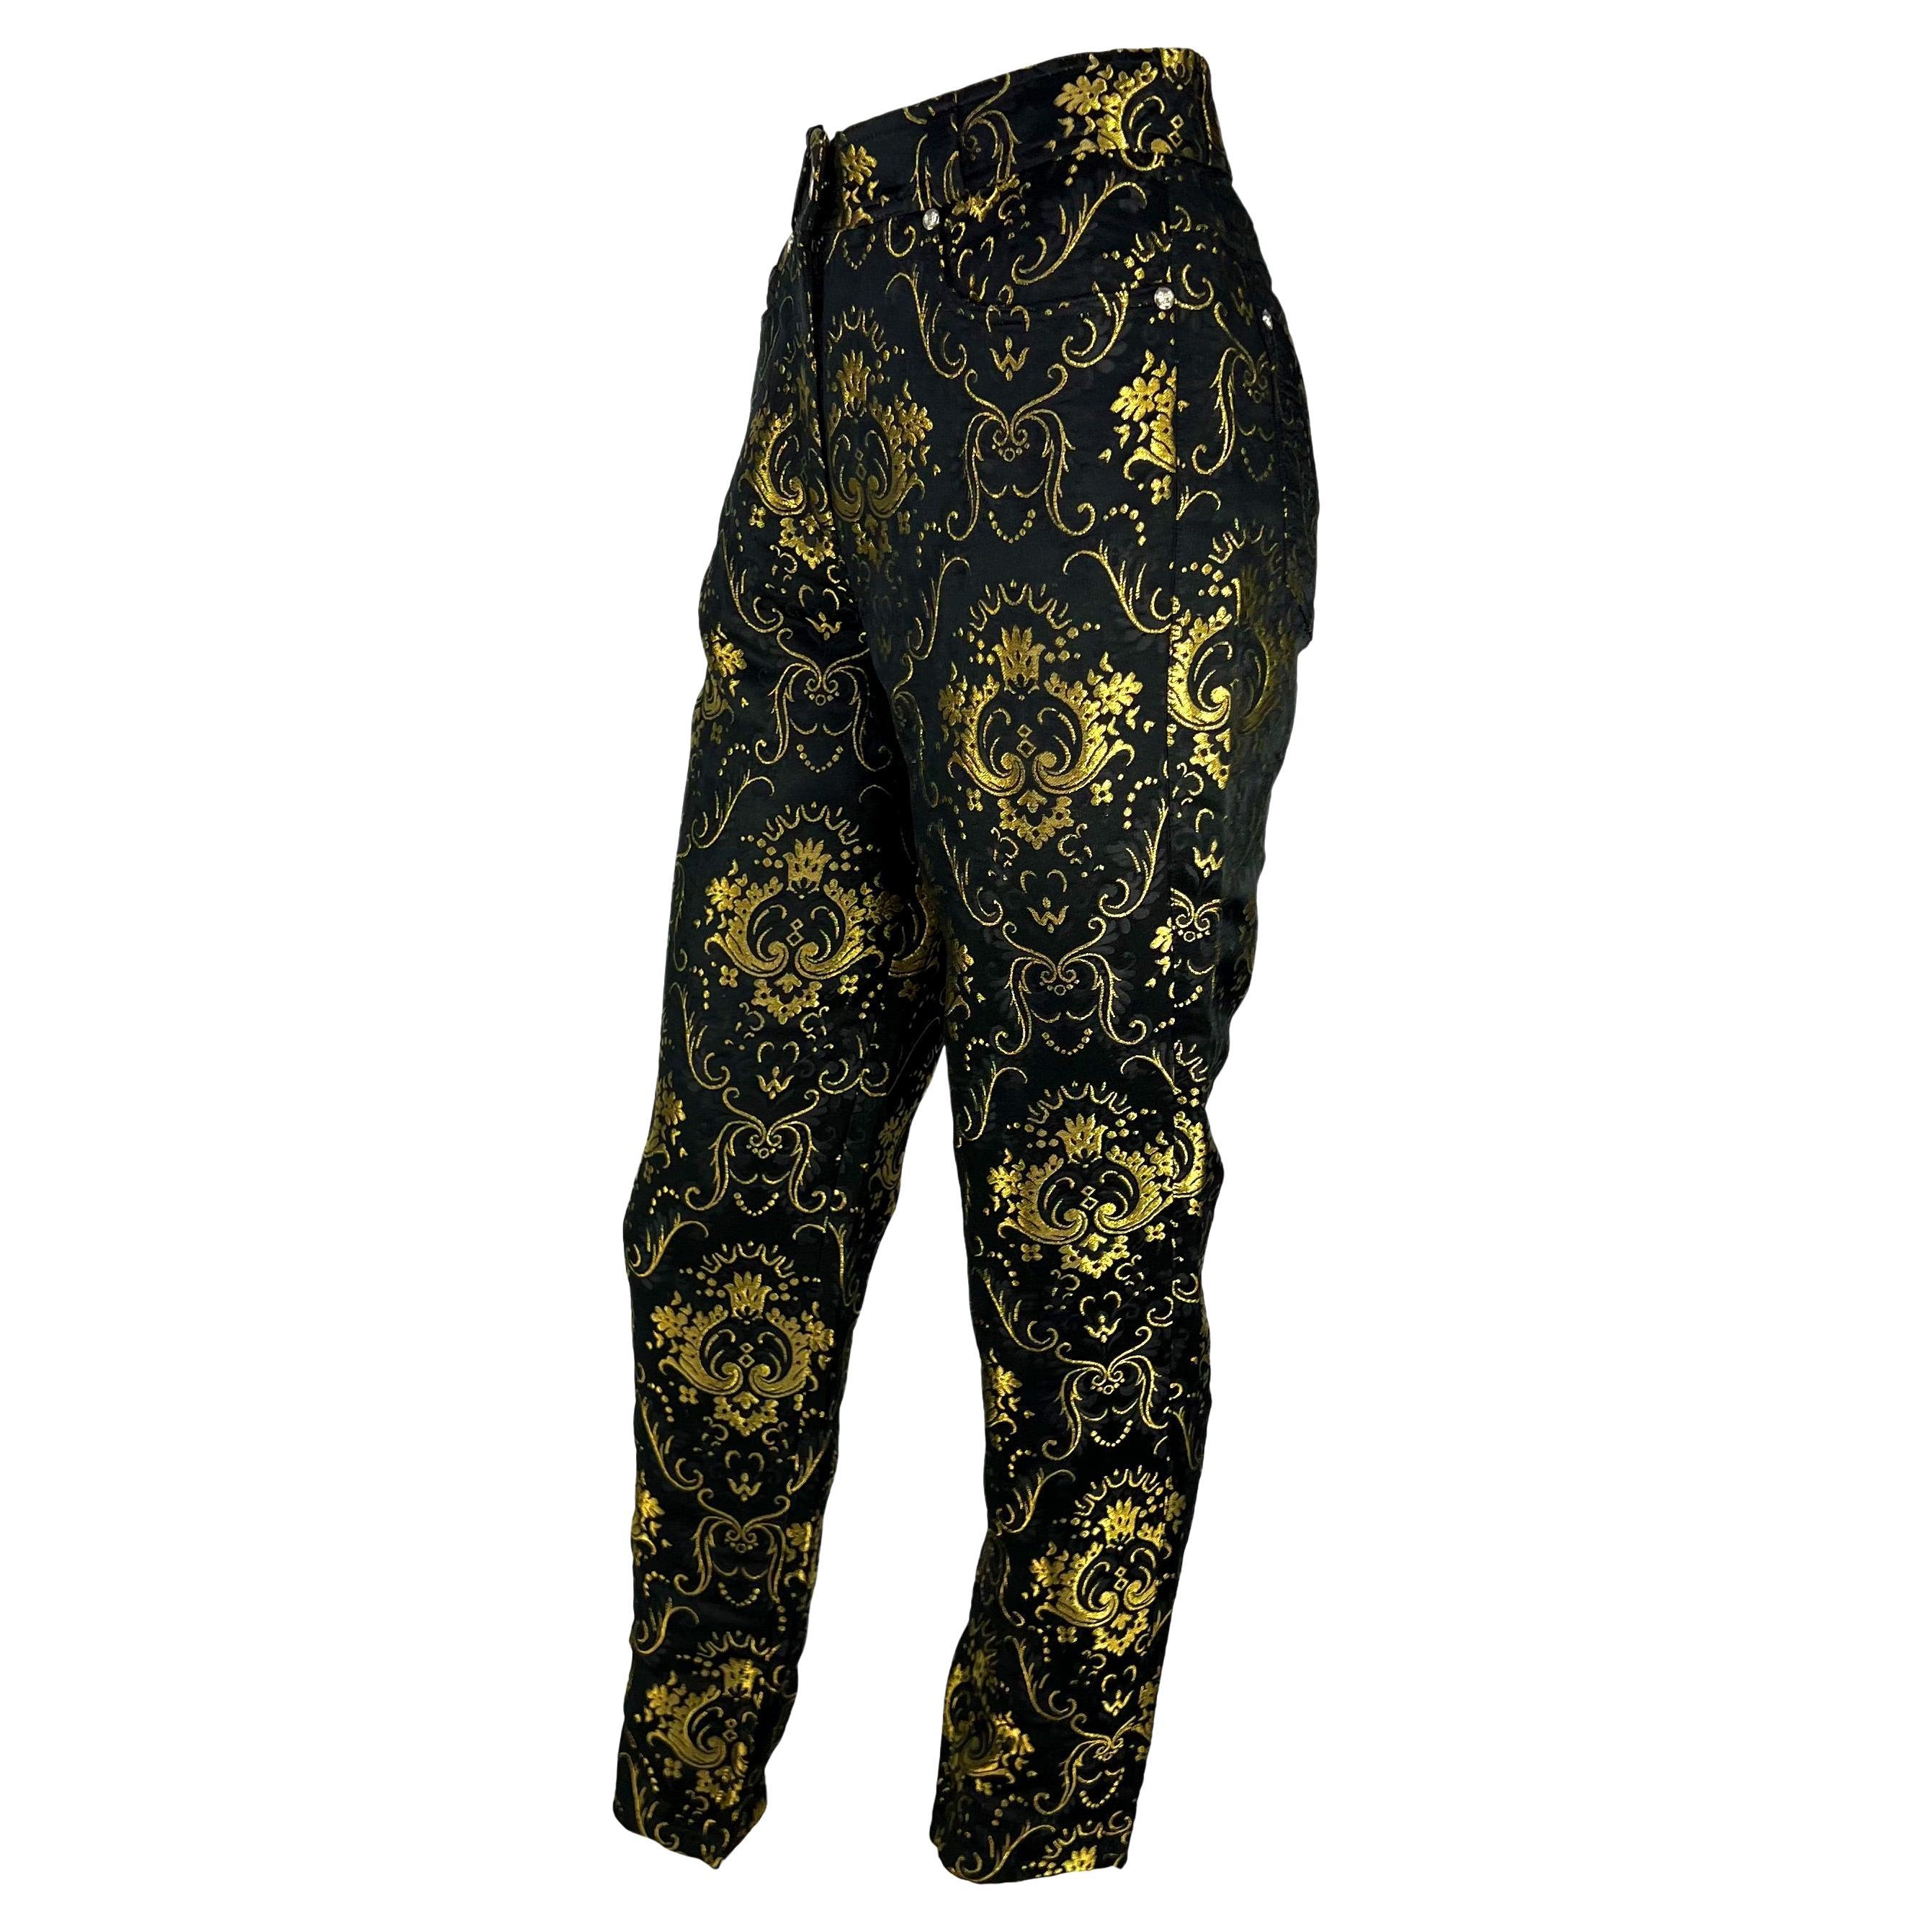 Presenting a fabulous pair of baroque Gianni Versace Couture pants, designed by Gianni Versace. From 1995, these black and gold brocade pants feature a bold baroque pattern and a silver Versace Medusa button closure and rivets. Never before worn,